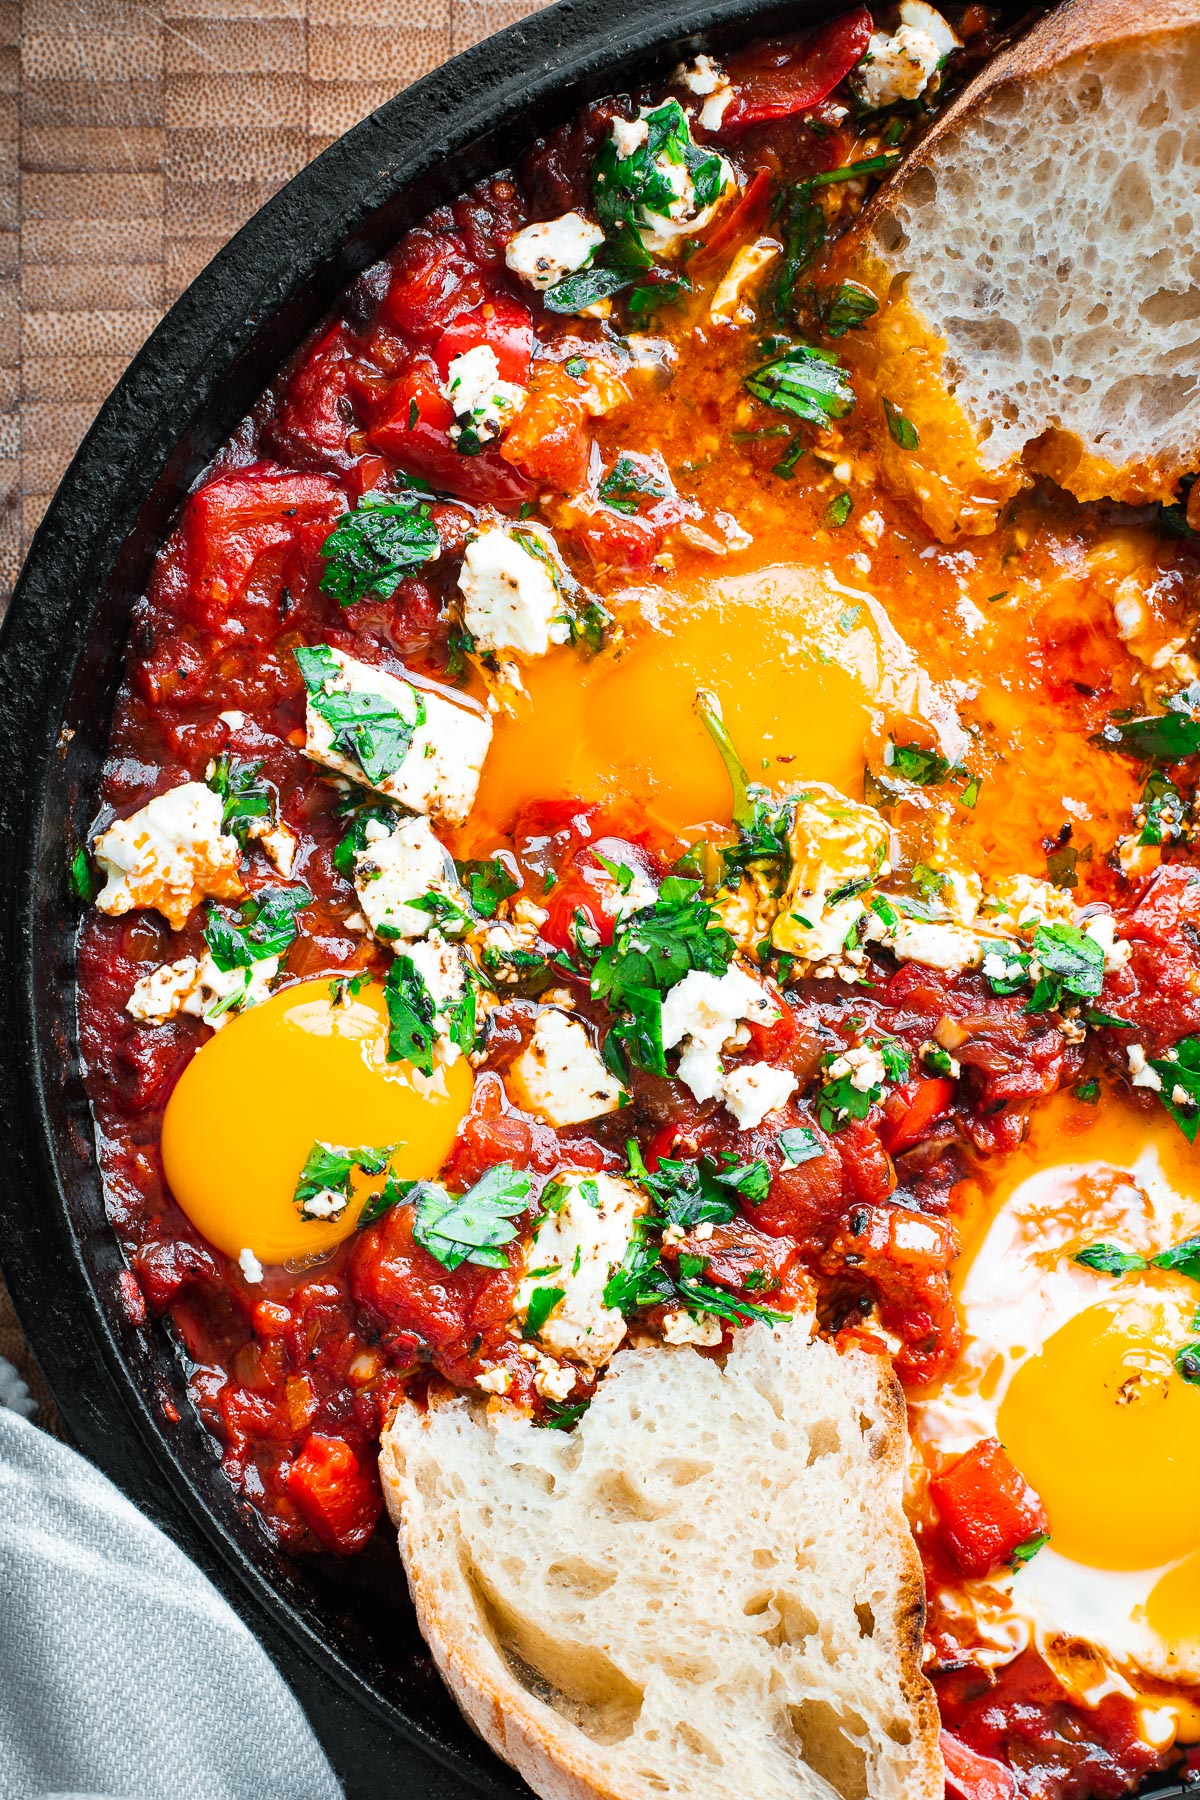 Harissa shakshuka with bread dipped into a very runny egg yolk in a cast iron skillet.